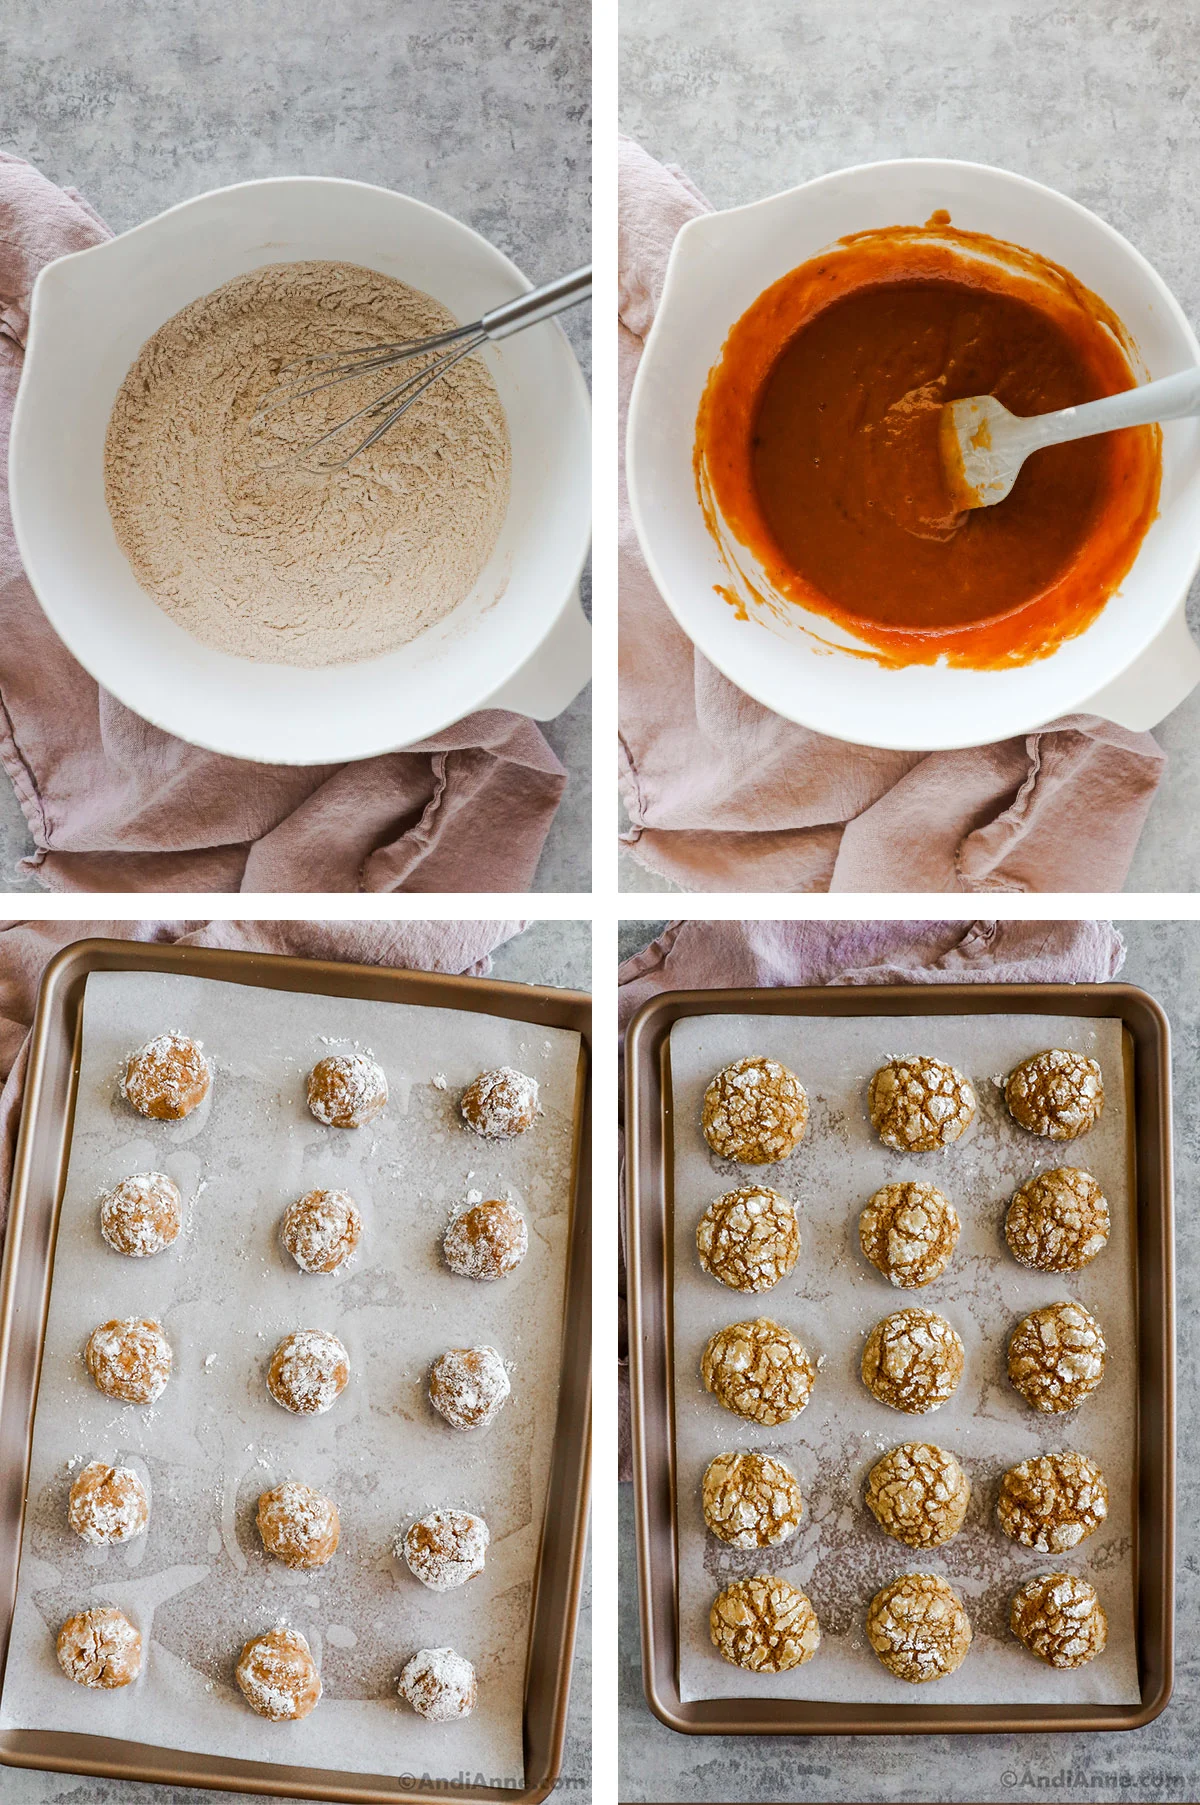 Four images, first two are bowls with dry ingredients and wet ingredients for recipe. Last two are baking sheet with baked and unbaked cookies.